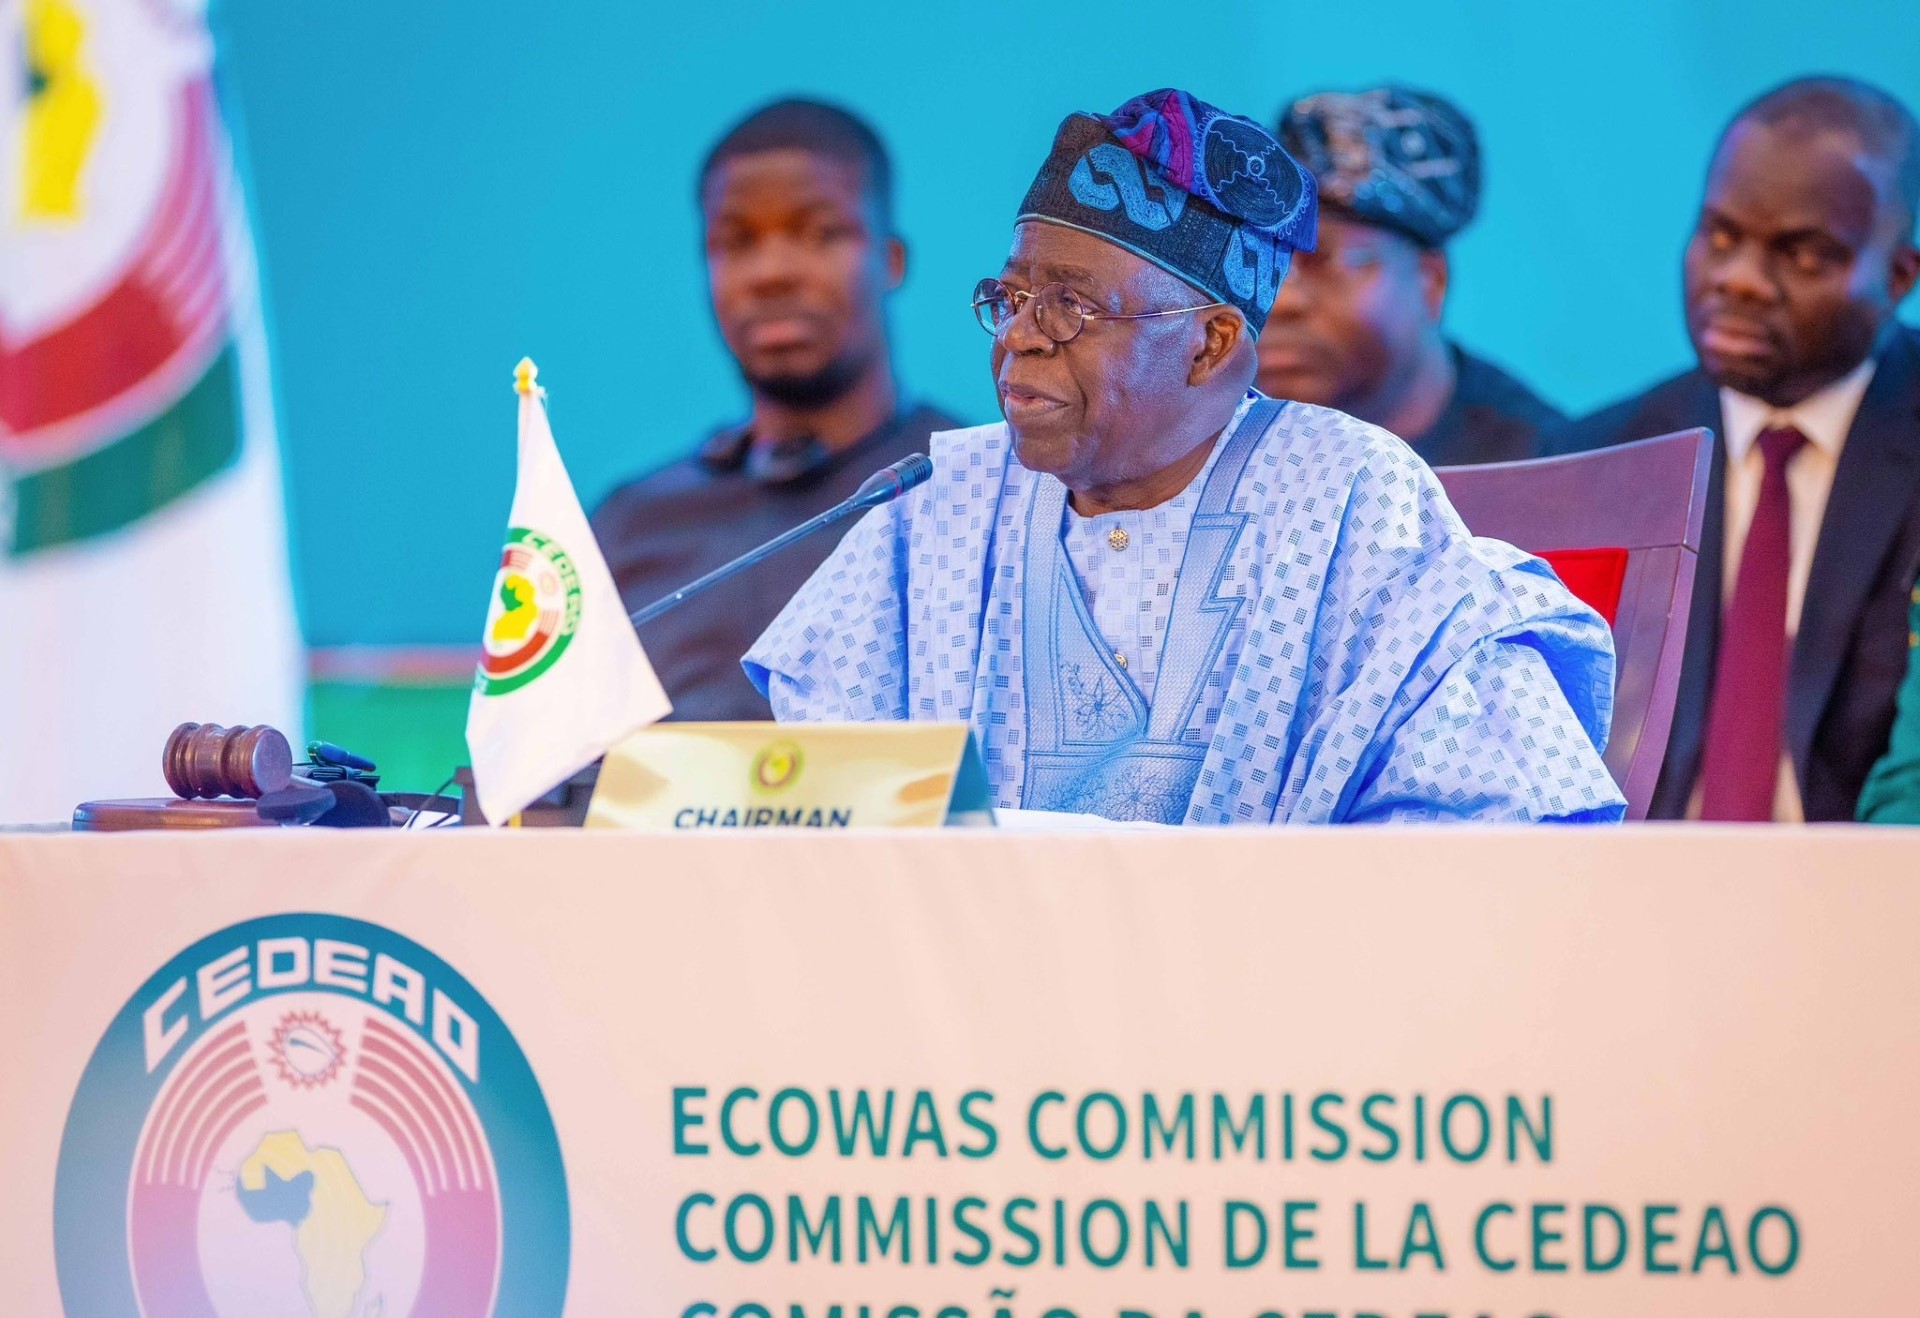 Why ECOWAS Chose Appeasement in Dealing with Military Coups in West Africa?